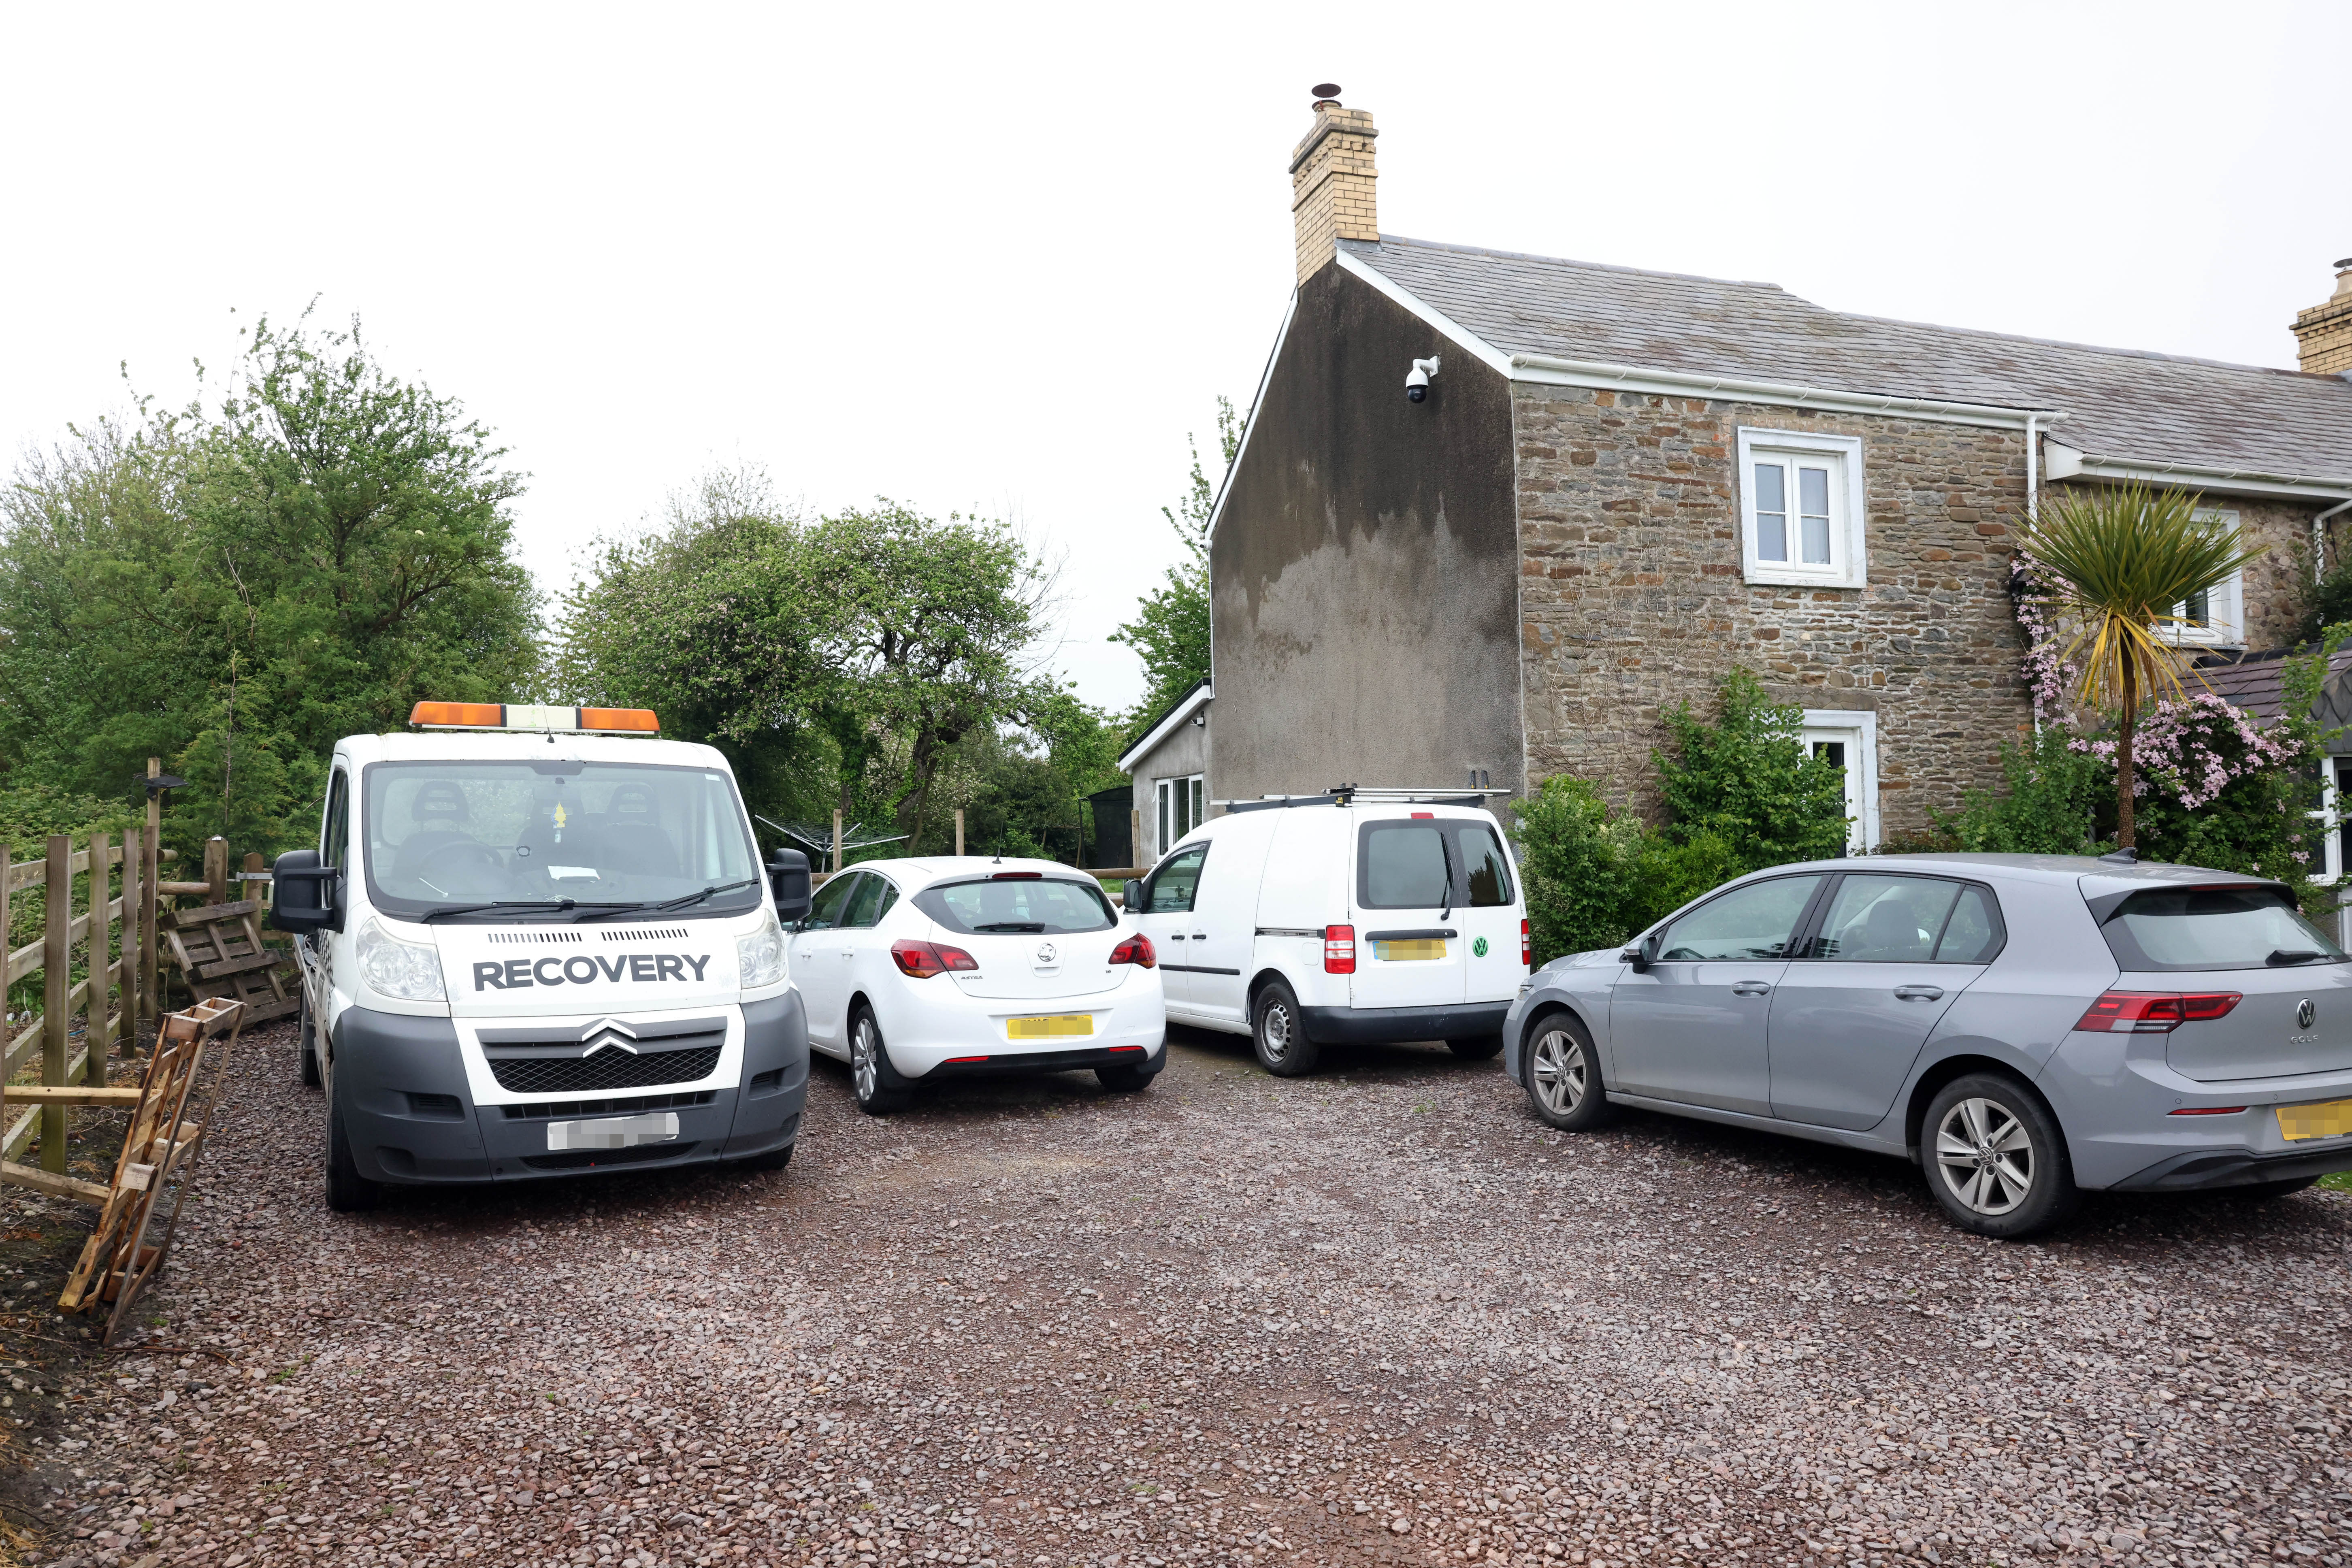 Jenny Cummings refuses to comply with the order and move the vehicles from her driveway